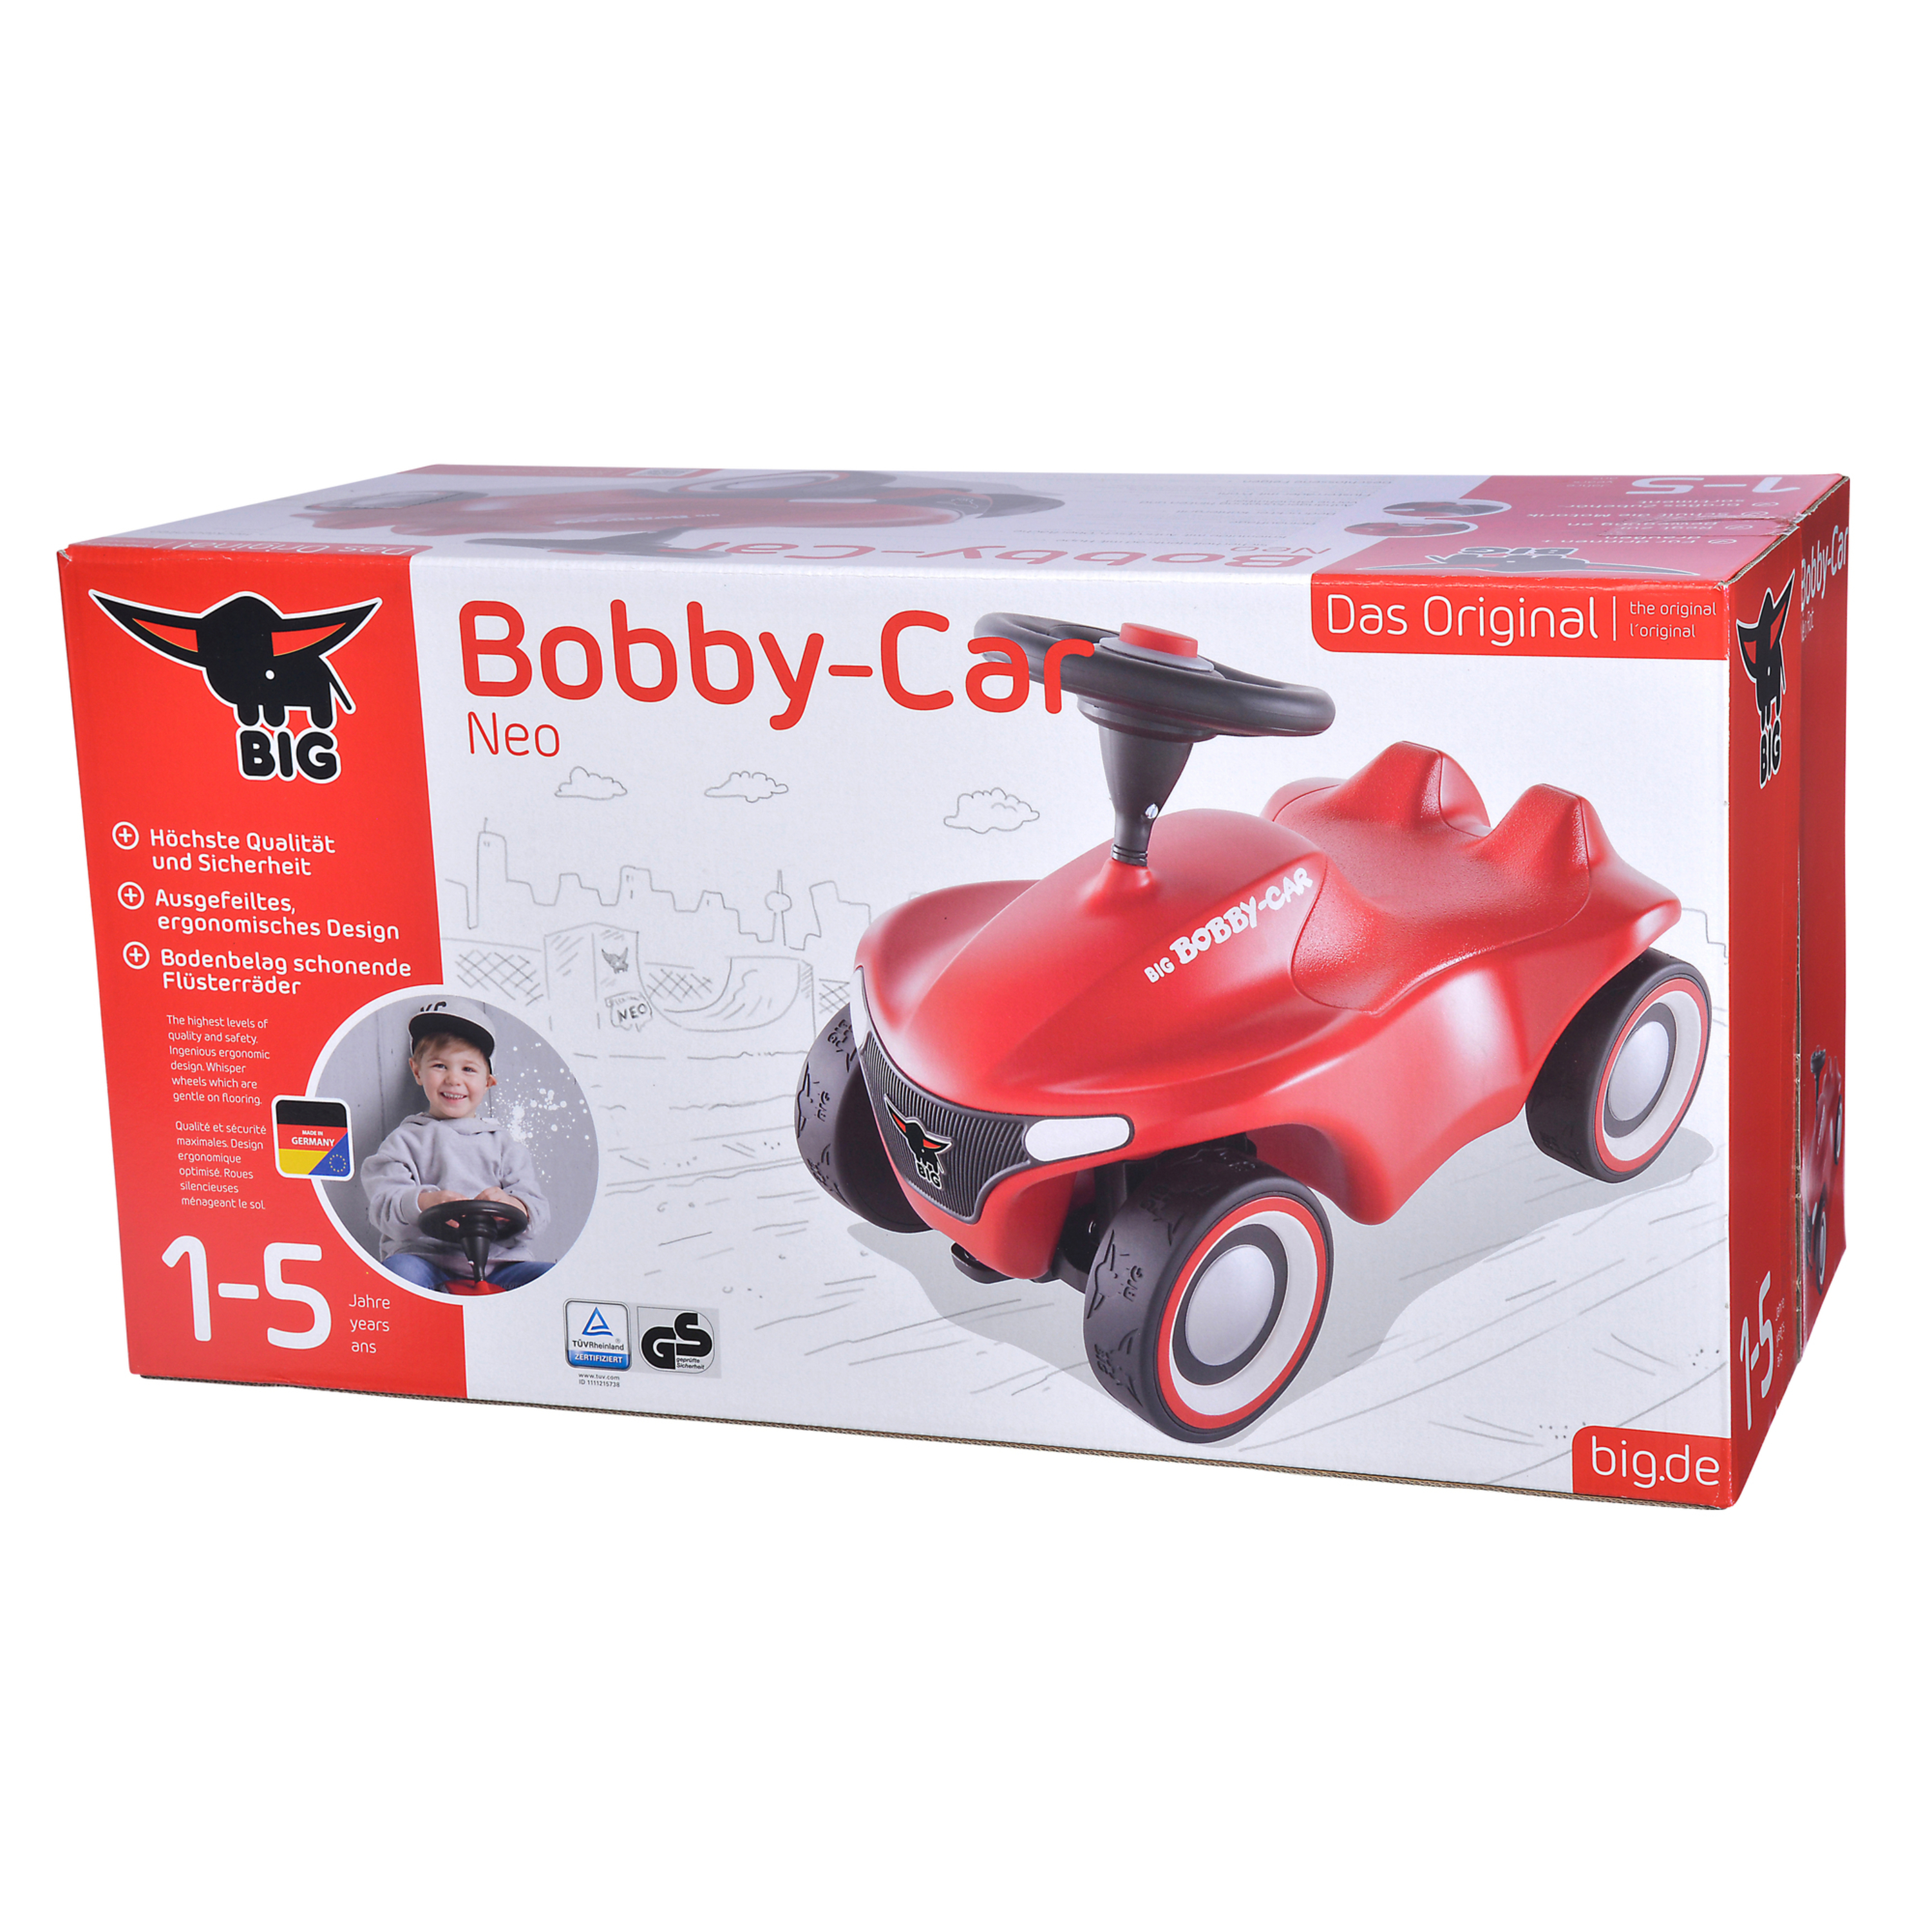 BIG - Bobby Car, Neo Red - image 4 of 4